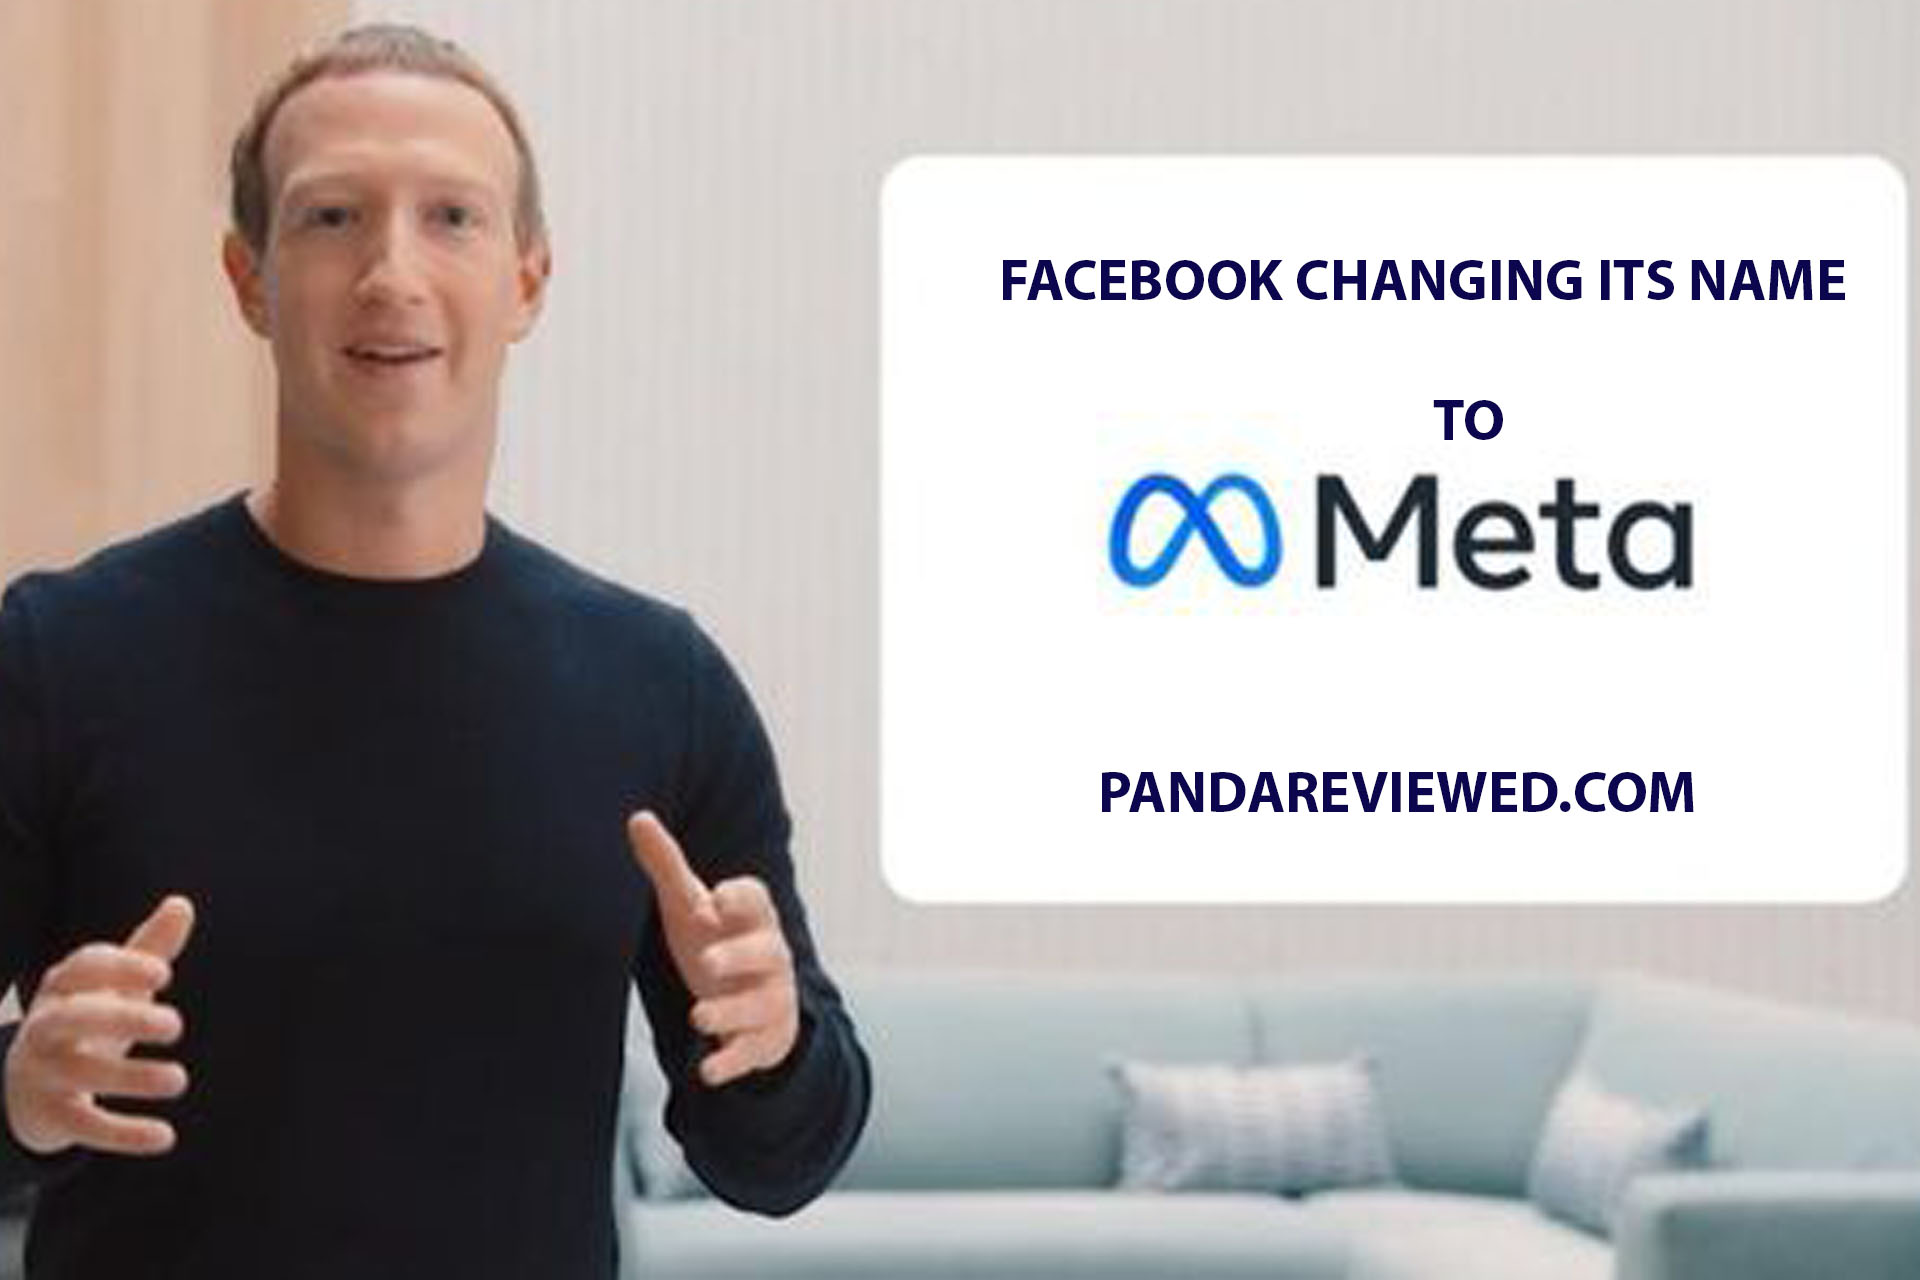 FACEBOOK changing its name to company in META new digital world known as the “Metaverse”.